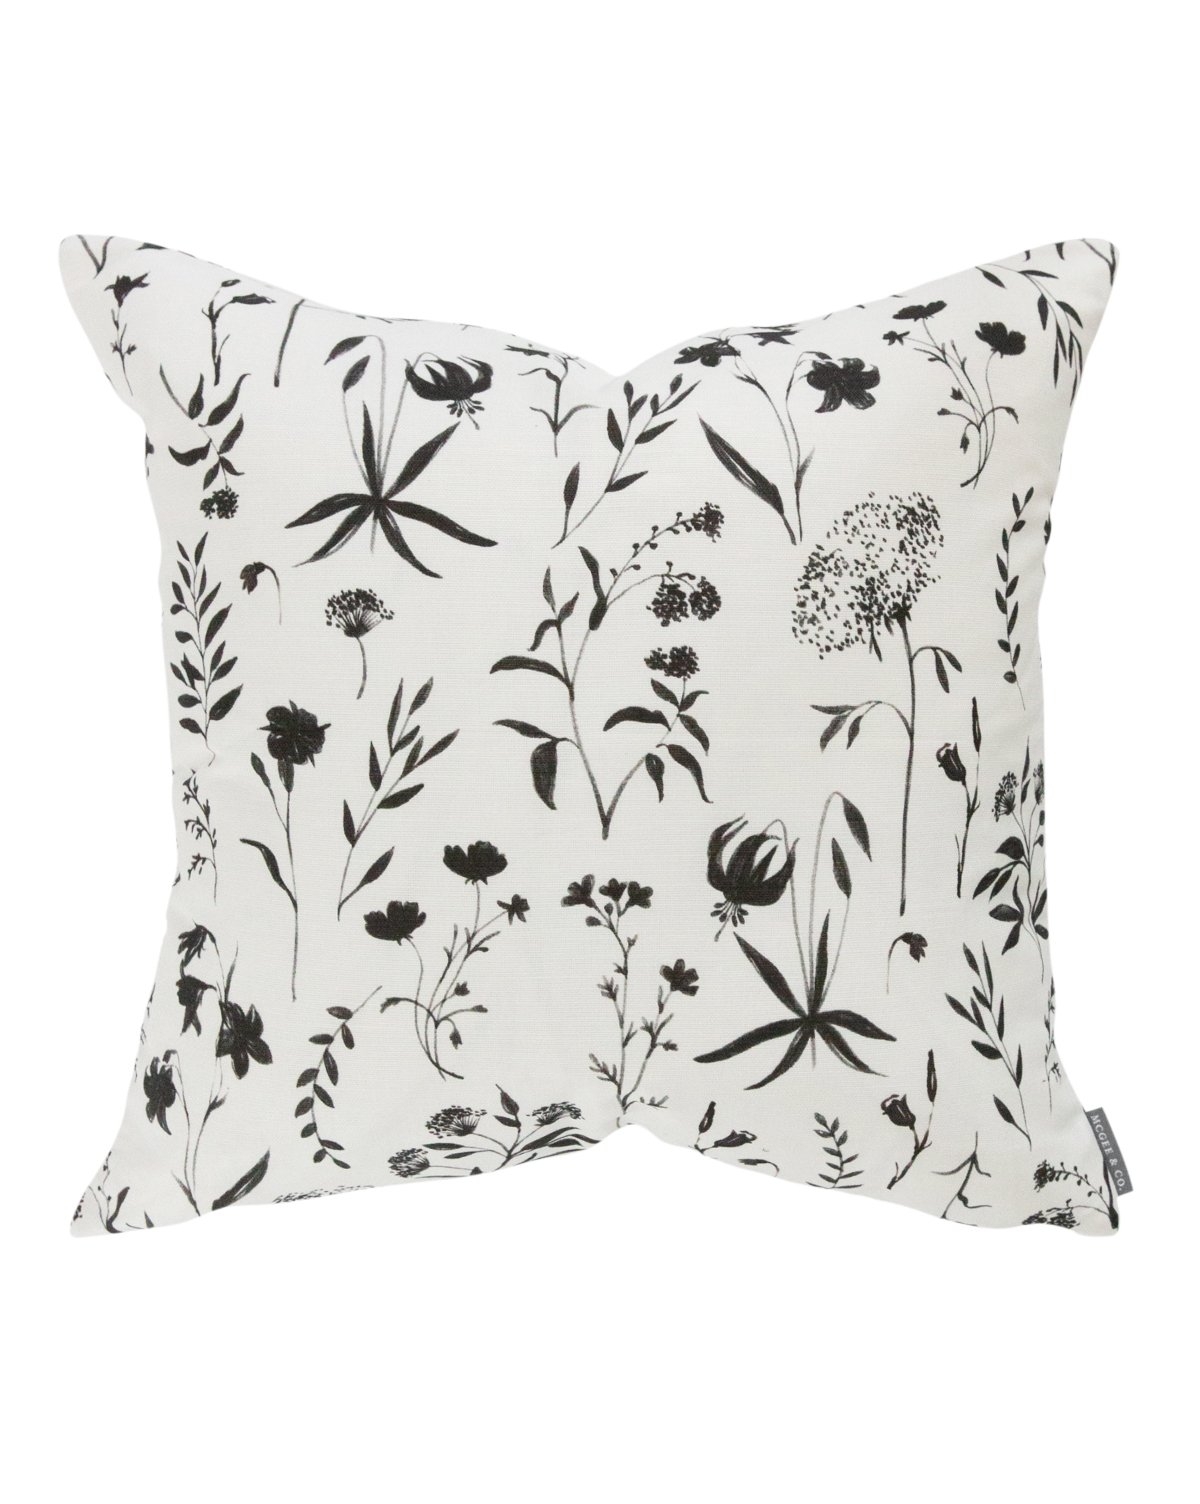 JUNO FLORAL PILLOW WITHOUT INSERT, WHITE, 20" x 20" - Image 0